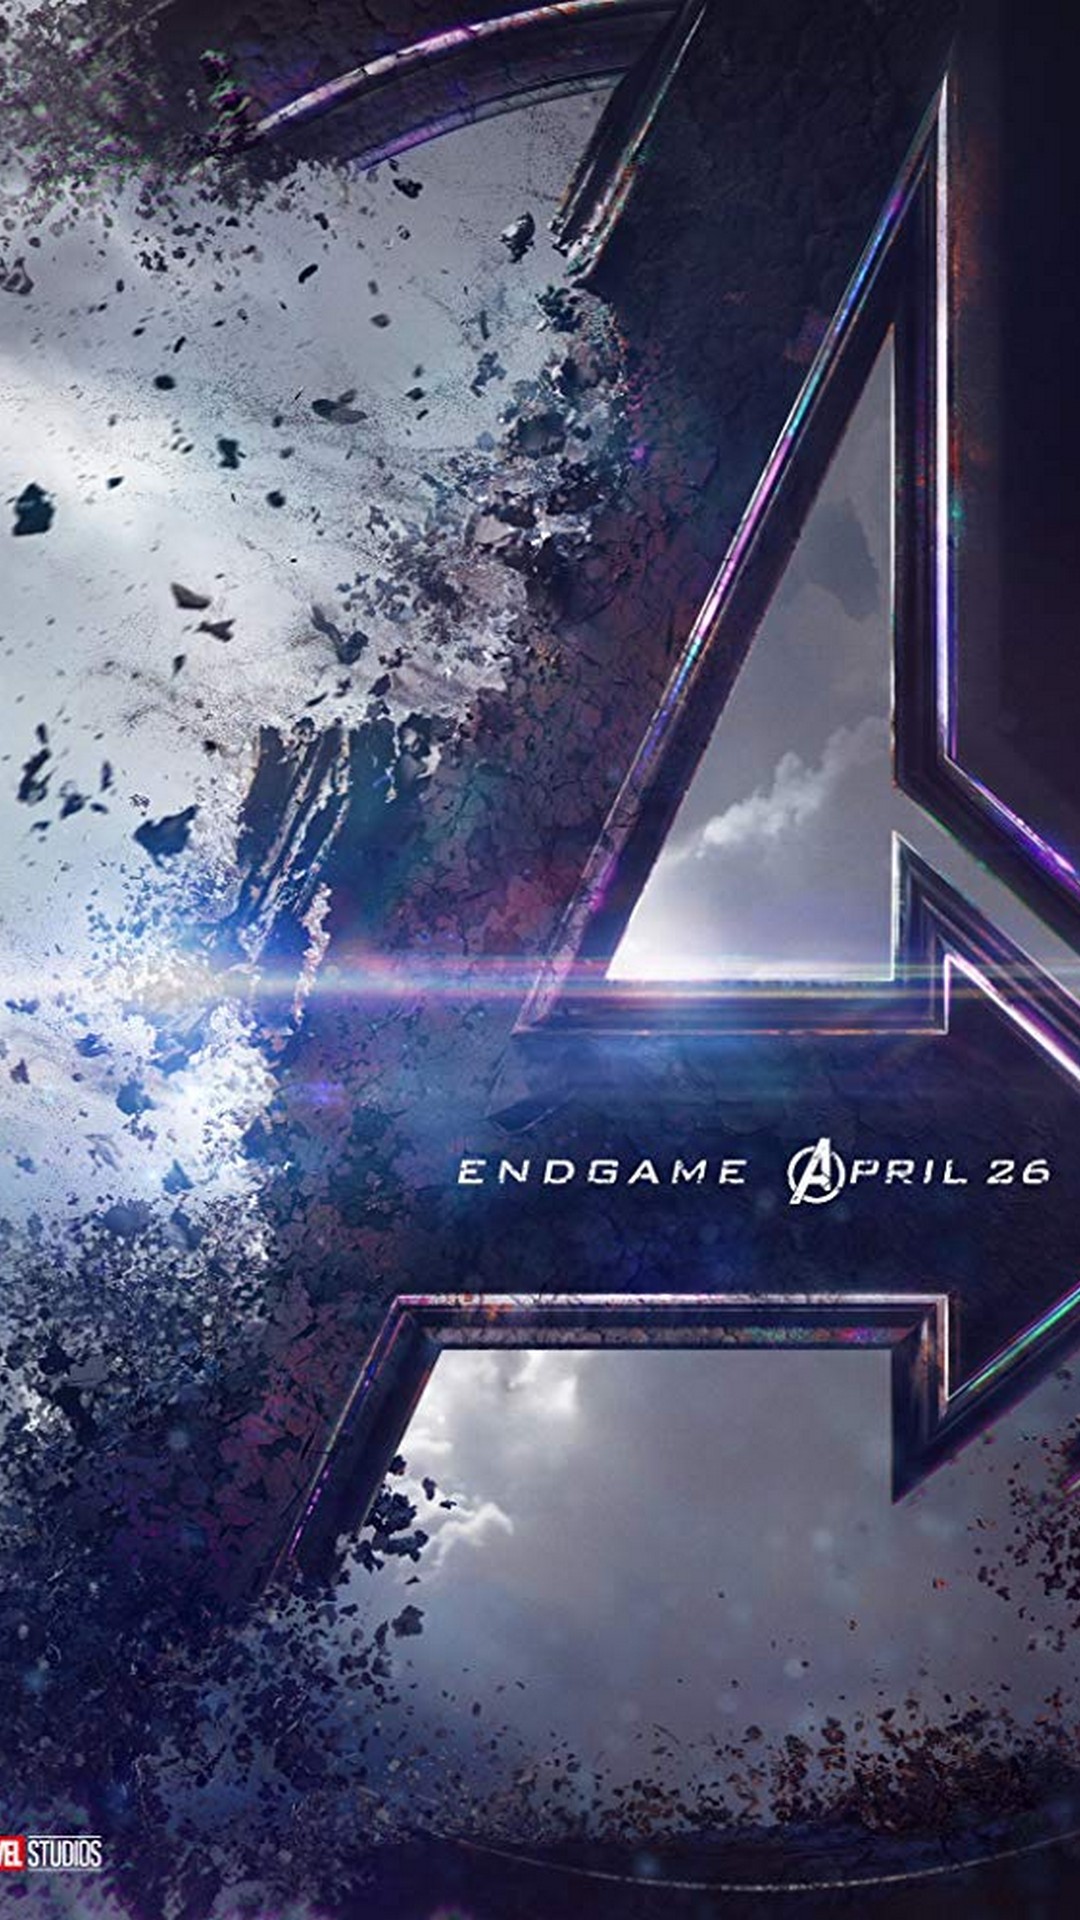 Phones Wallpaper Avengers Endgame 2019 with high-resolution 1080x1920 pixel. Download all Mobile Wallpapers and Use them as wallpapers for your iPhone, Tablet, iPad, Android and other mobile devices